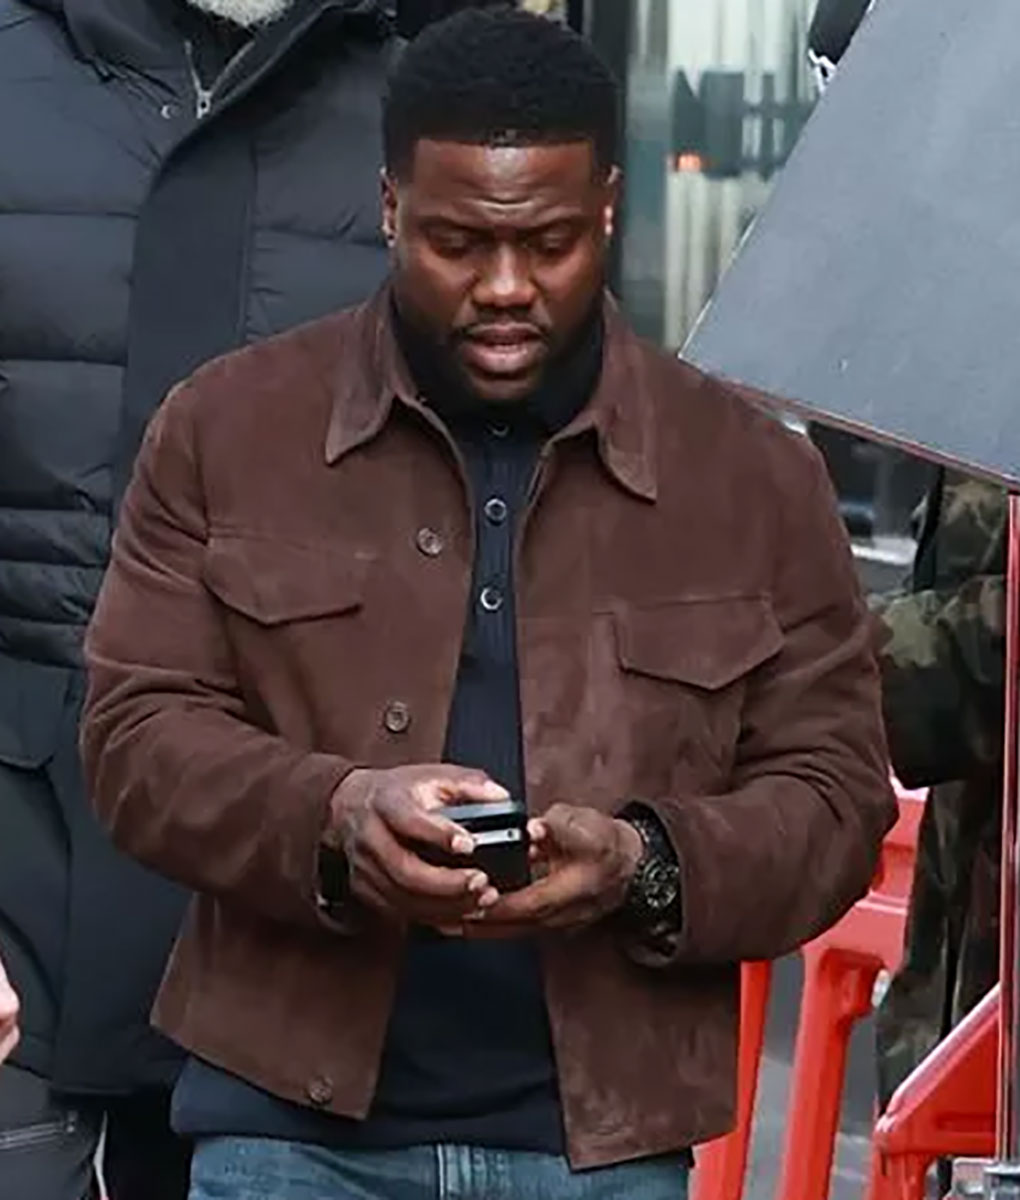 Kevin Hart Lift (Cyrus Whitaker) Suede Leather Brown Jacket